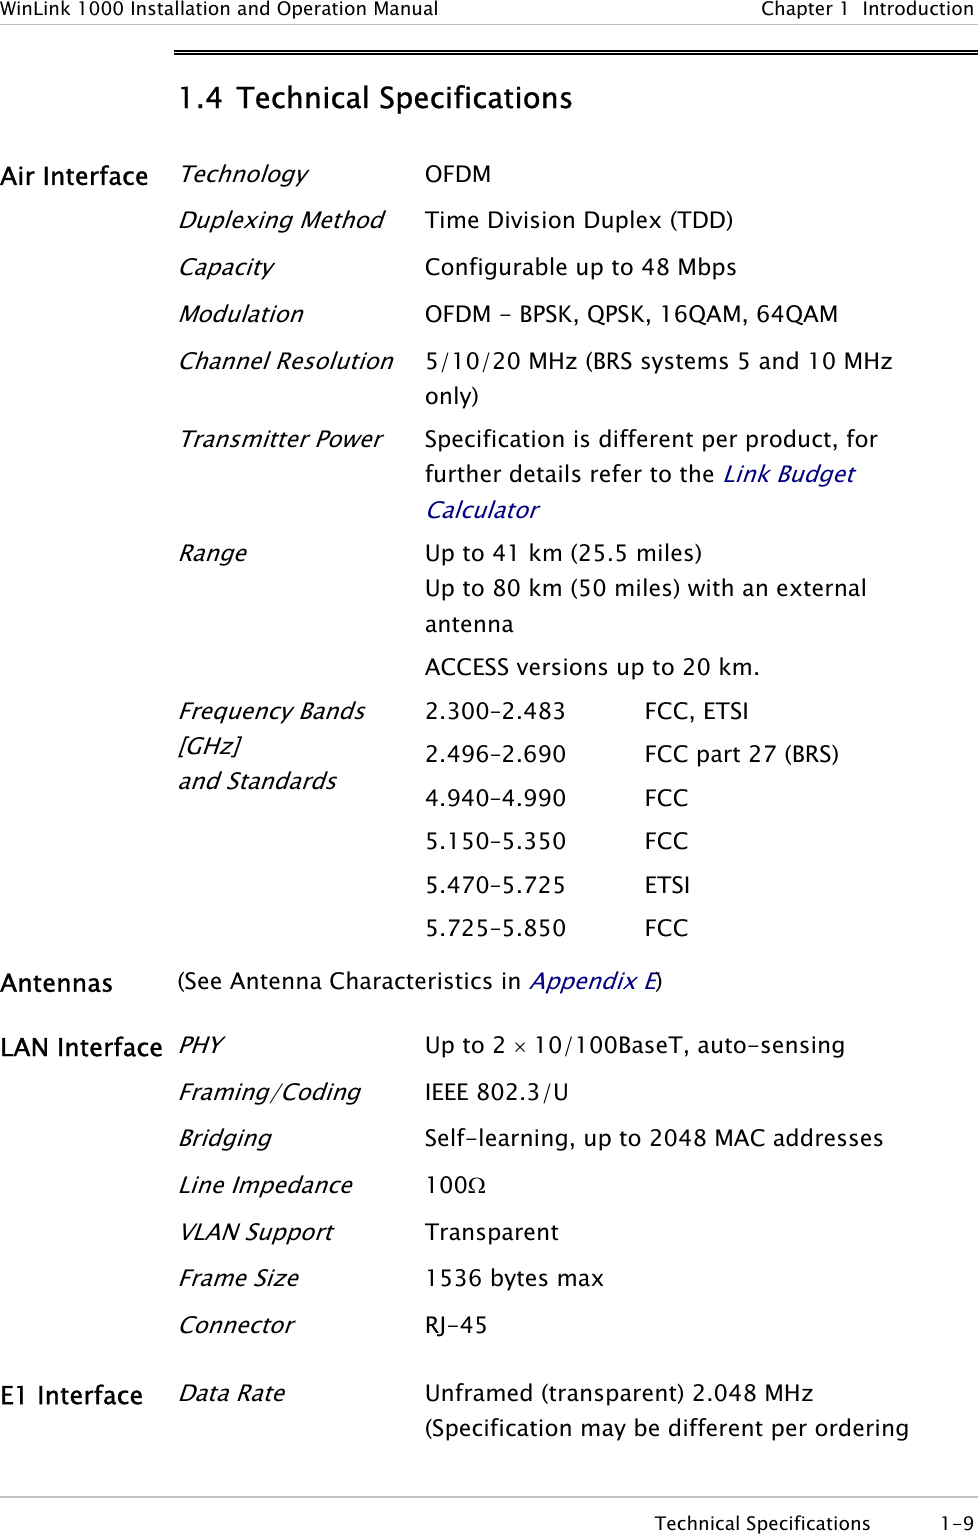 WinLink 1000 Installation and Operation Manual  Chapter 1  Introduction 1.4 Technical Specifications Air Interface Technology OFDM  Duplexing Method Time Division Duplex (TDD)  Capacity Configurable up to 48 Mbps   Modulation OFDM - BPSK, QPSK, 16QAM, 64QAM  Channel Resolution 5/10/20 MHz (BRS systems 5 and 10 MHz only)  Transmitter Power Specification is different per product, for further details refer to the Link Budget Calculator Range Up to 41 km (25.5 miles)  Up to 80 km (50 miles) with an external antenna ACCESS versions up to 20 km.  Frequency Bands [GHz] and Standards 2.300–2.483 2.496–2.690 4.940–4.990 5.150–5.350 5.470–5.725 5.725–5.850 FCC, ETSI FCC part 27 (BRS) FCC FCC ETSI FCC Antennas  (See Antenna Characteristics in Appendix E) LAN Interface PHY Up to 2 × 10/100BaseT, auto-sensing  Framing/Coding IEEE 802.3/U  Bridging Self-learning, up to 2048 MAC addresses  Line Impedance 100Ω  VLAN Support Transparent  Frame Size 1536 bytes max  Connector RJ-45 E1 Interface Data Rate Unframed (transparent) 2.048 MHz (Specification may be different per ordering  Technical Specifications  1-9 